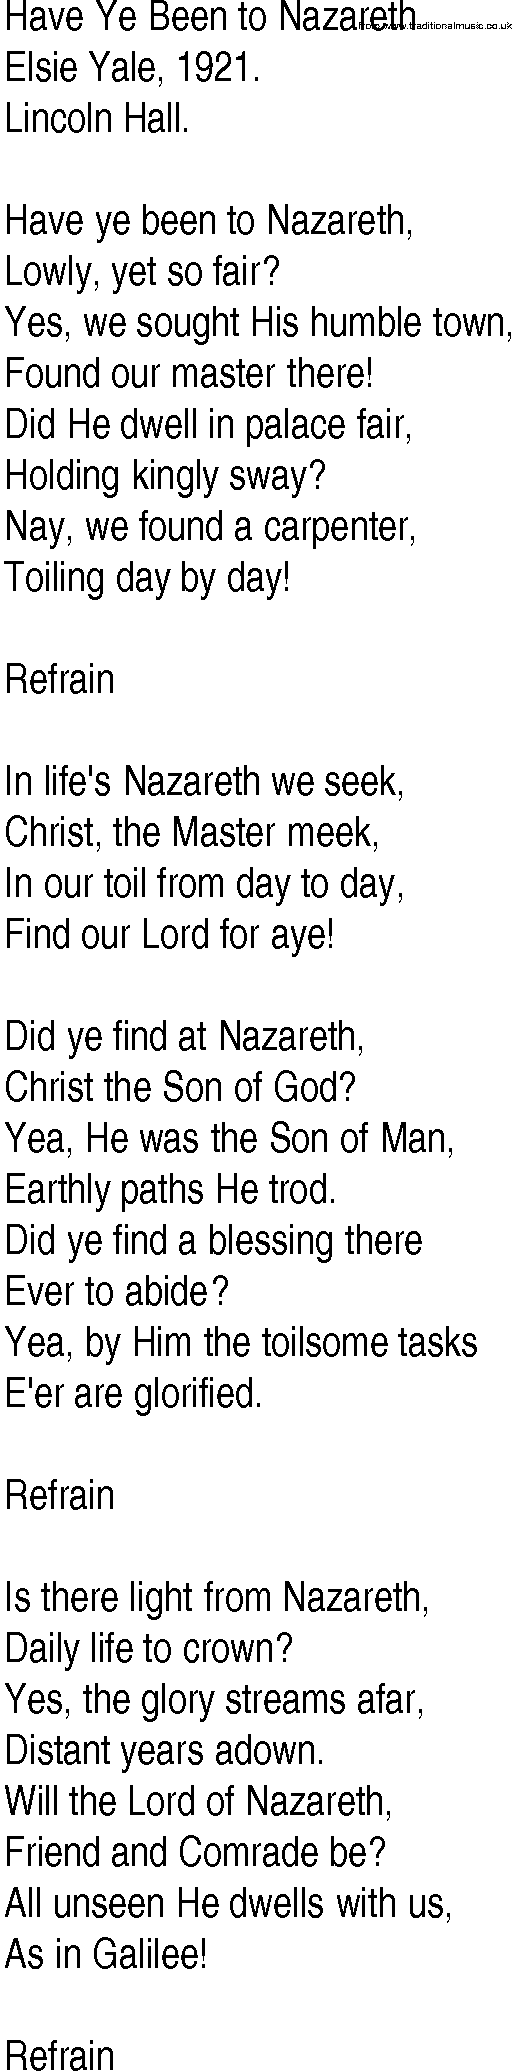 Hymn and Gospel Song: Have Ye Been to Nazareth by Elsie Yale lyrics